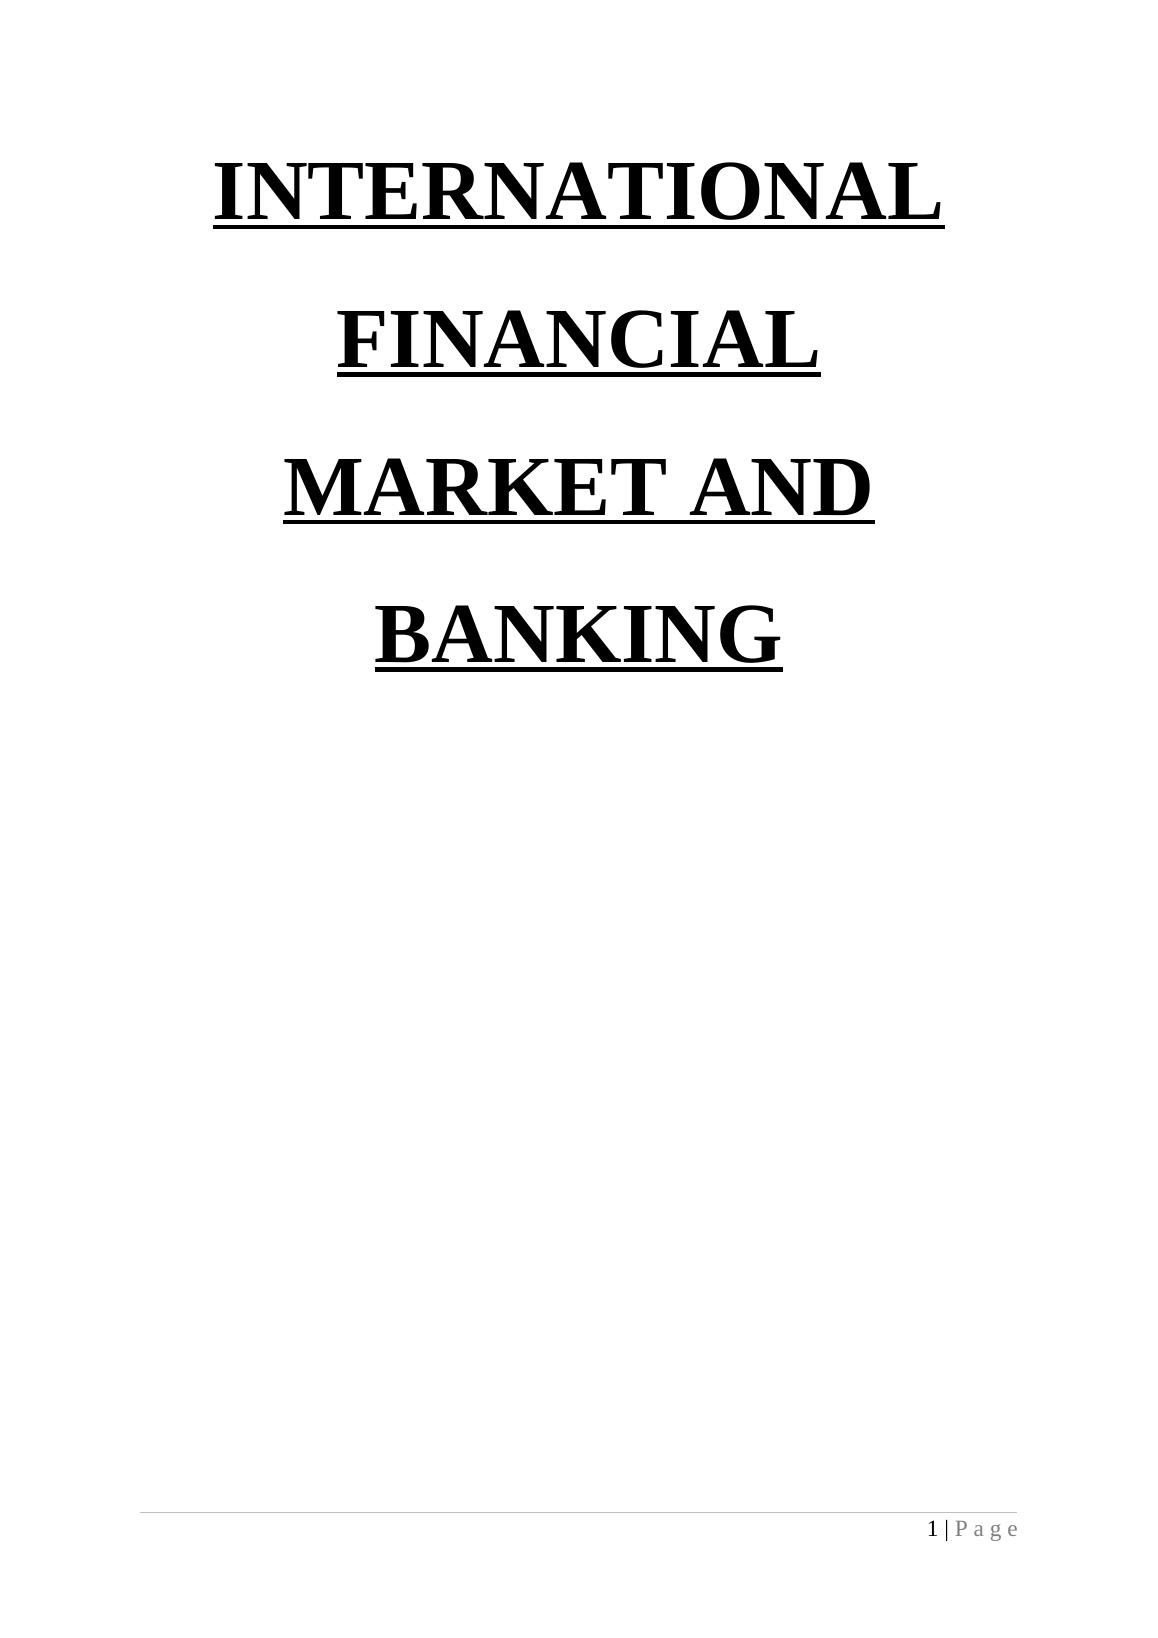 International Financial Market and Banking Assignment_1